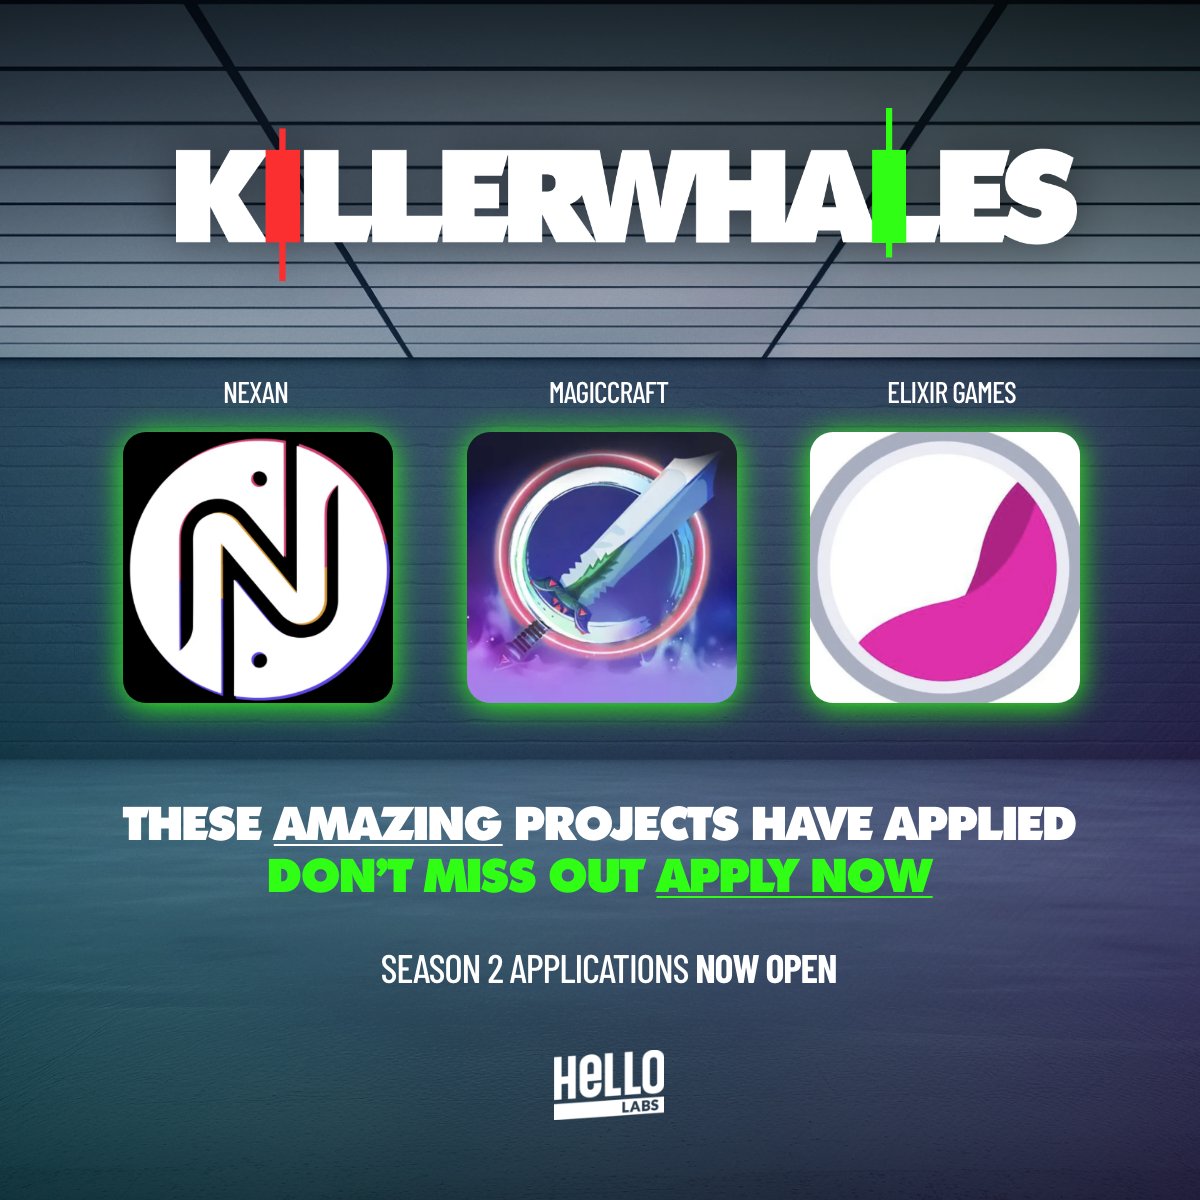 4 days until voting starts for Season 2 of @KillerWhalesTV 🐳 Say $HELLO to these killer projects that are looking to claim a top spot: 🔶@nexancoin 🔶@MagicCraftGame 🔶@Elixir_Games Vote for your favorite projects starting May 1st 🔥 Top 3 win a chance to pitch in front of